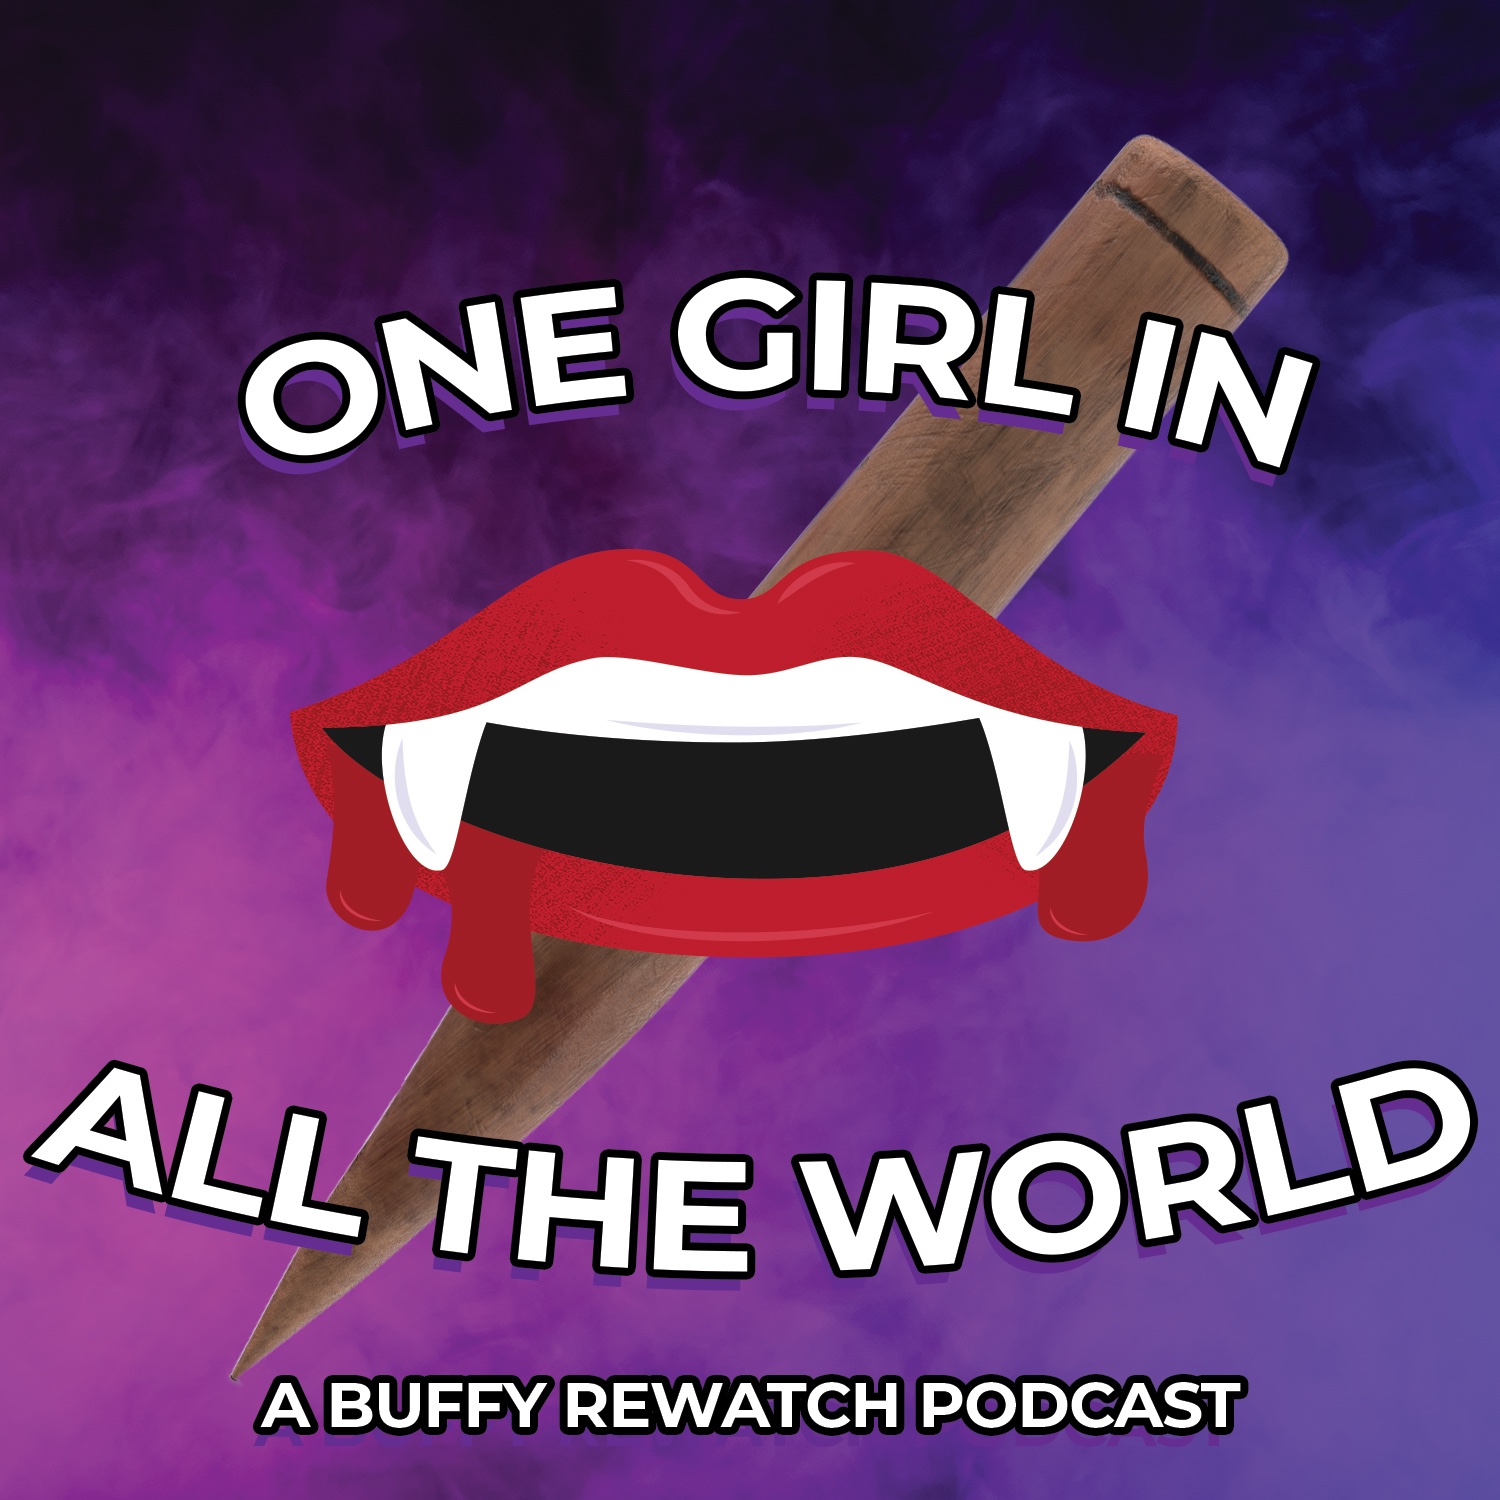 One Girl in All The World: A Buffy Rewatch Podcast